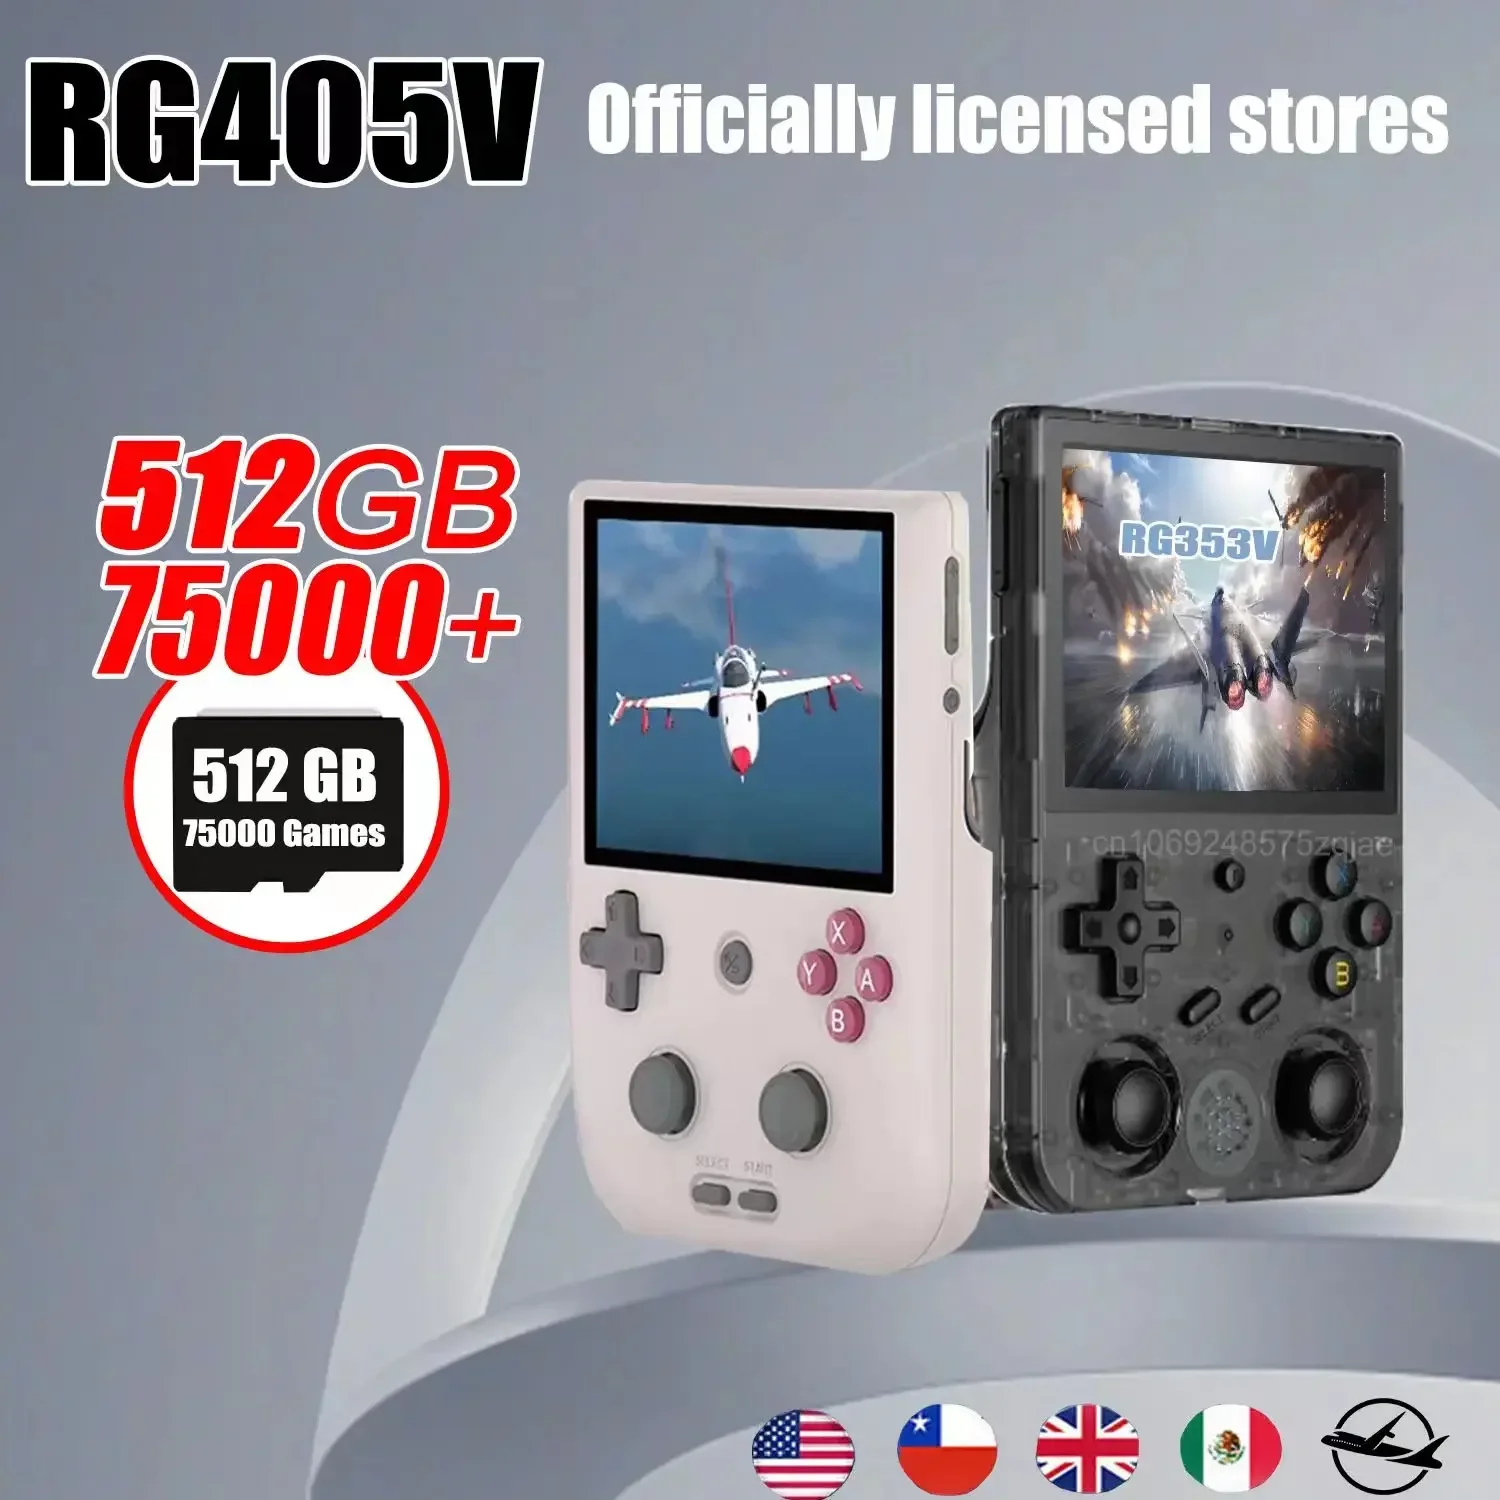 Anbernic announces launch date for the RG405V retro handheld